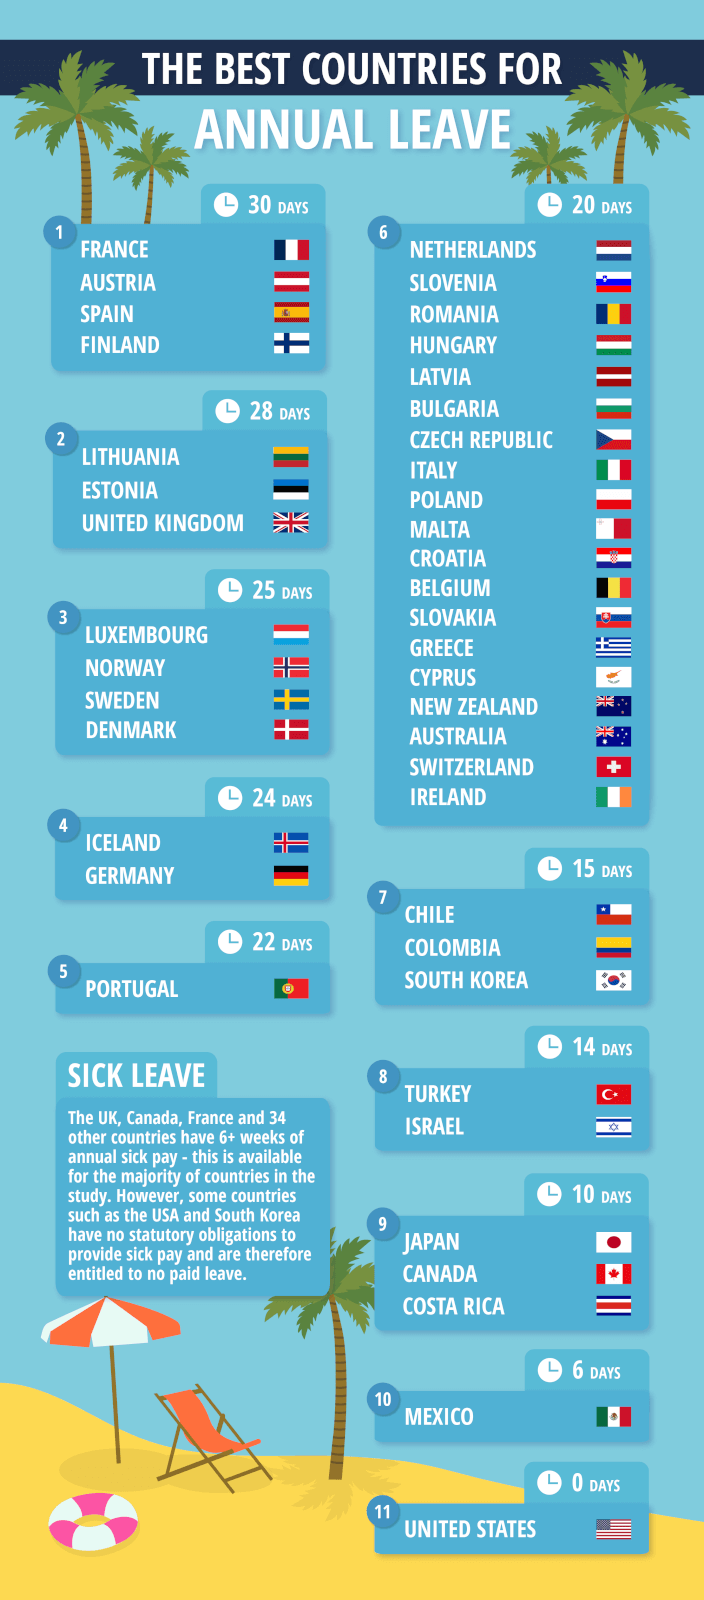 Image showing the best countries for annual leave entitlements.